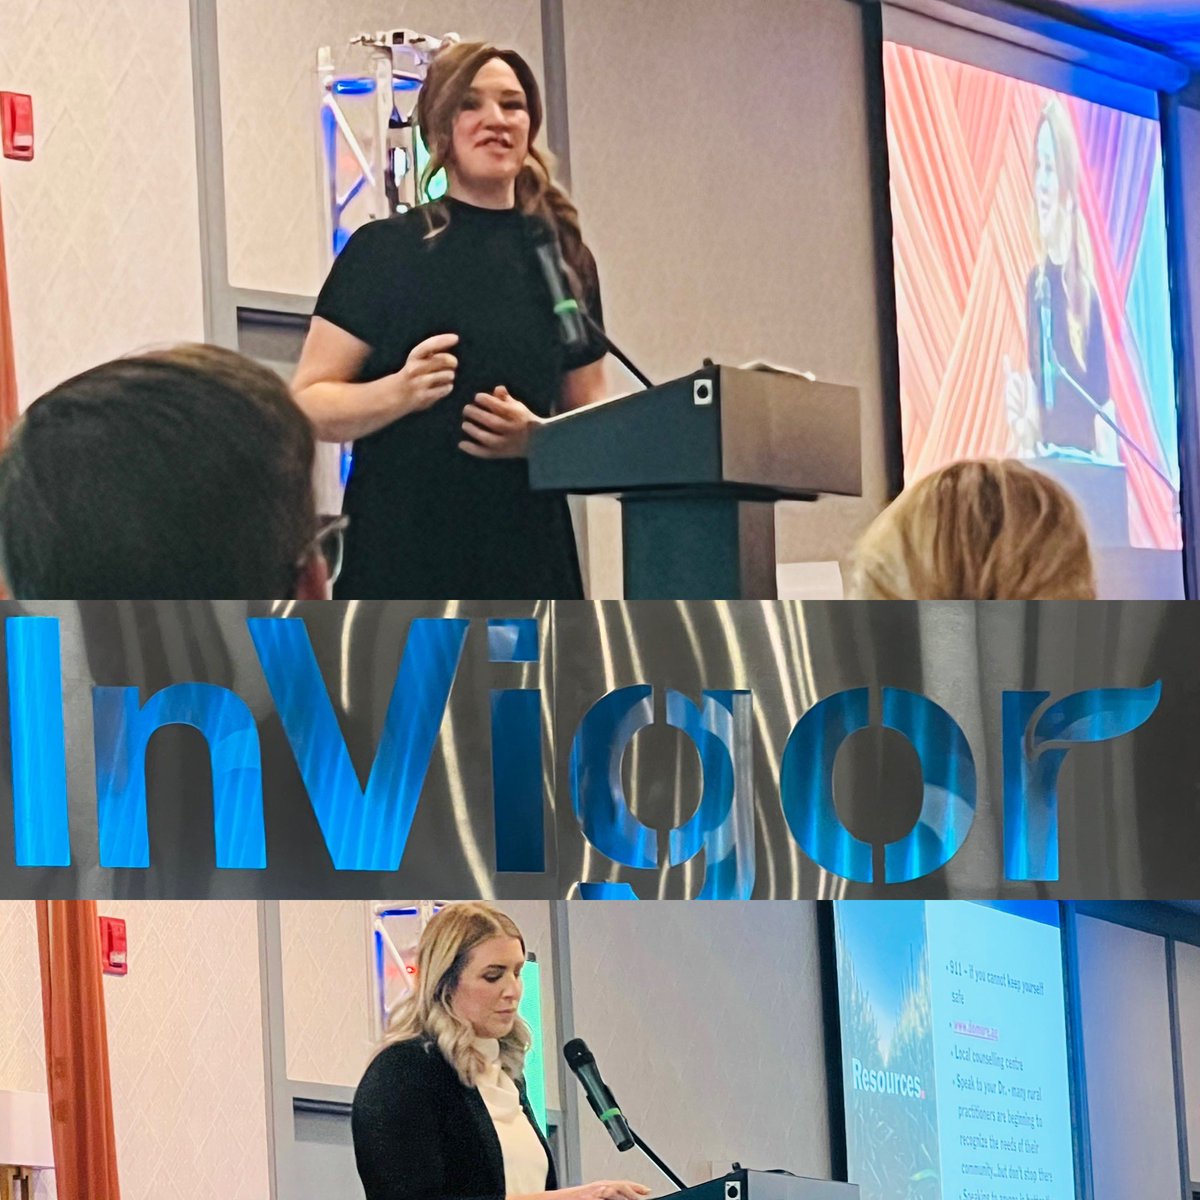 BASF had an amazing chance to host both Clara Hughes and Megz Reynolds to talk about the importance of mental health.  If you need a resource: domore.ag   letstalk.bell.ca. #clarahughes #domoreag